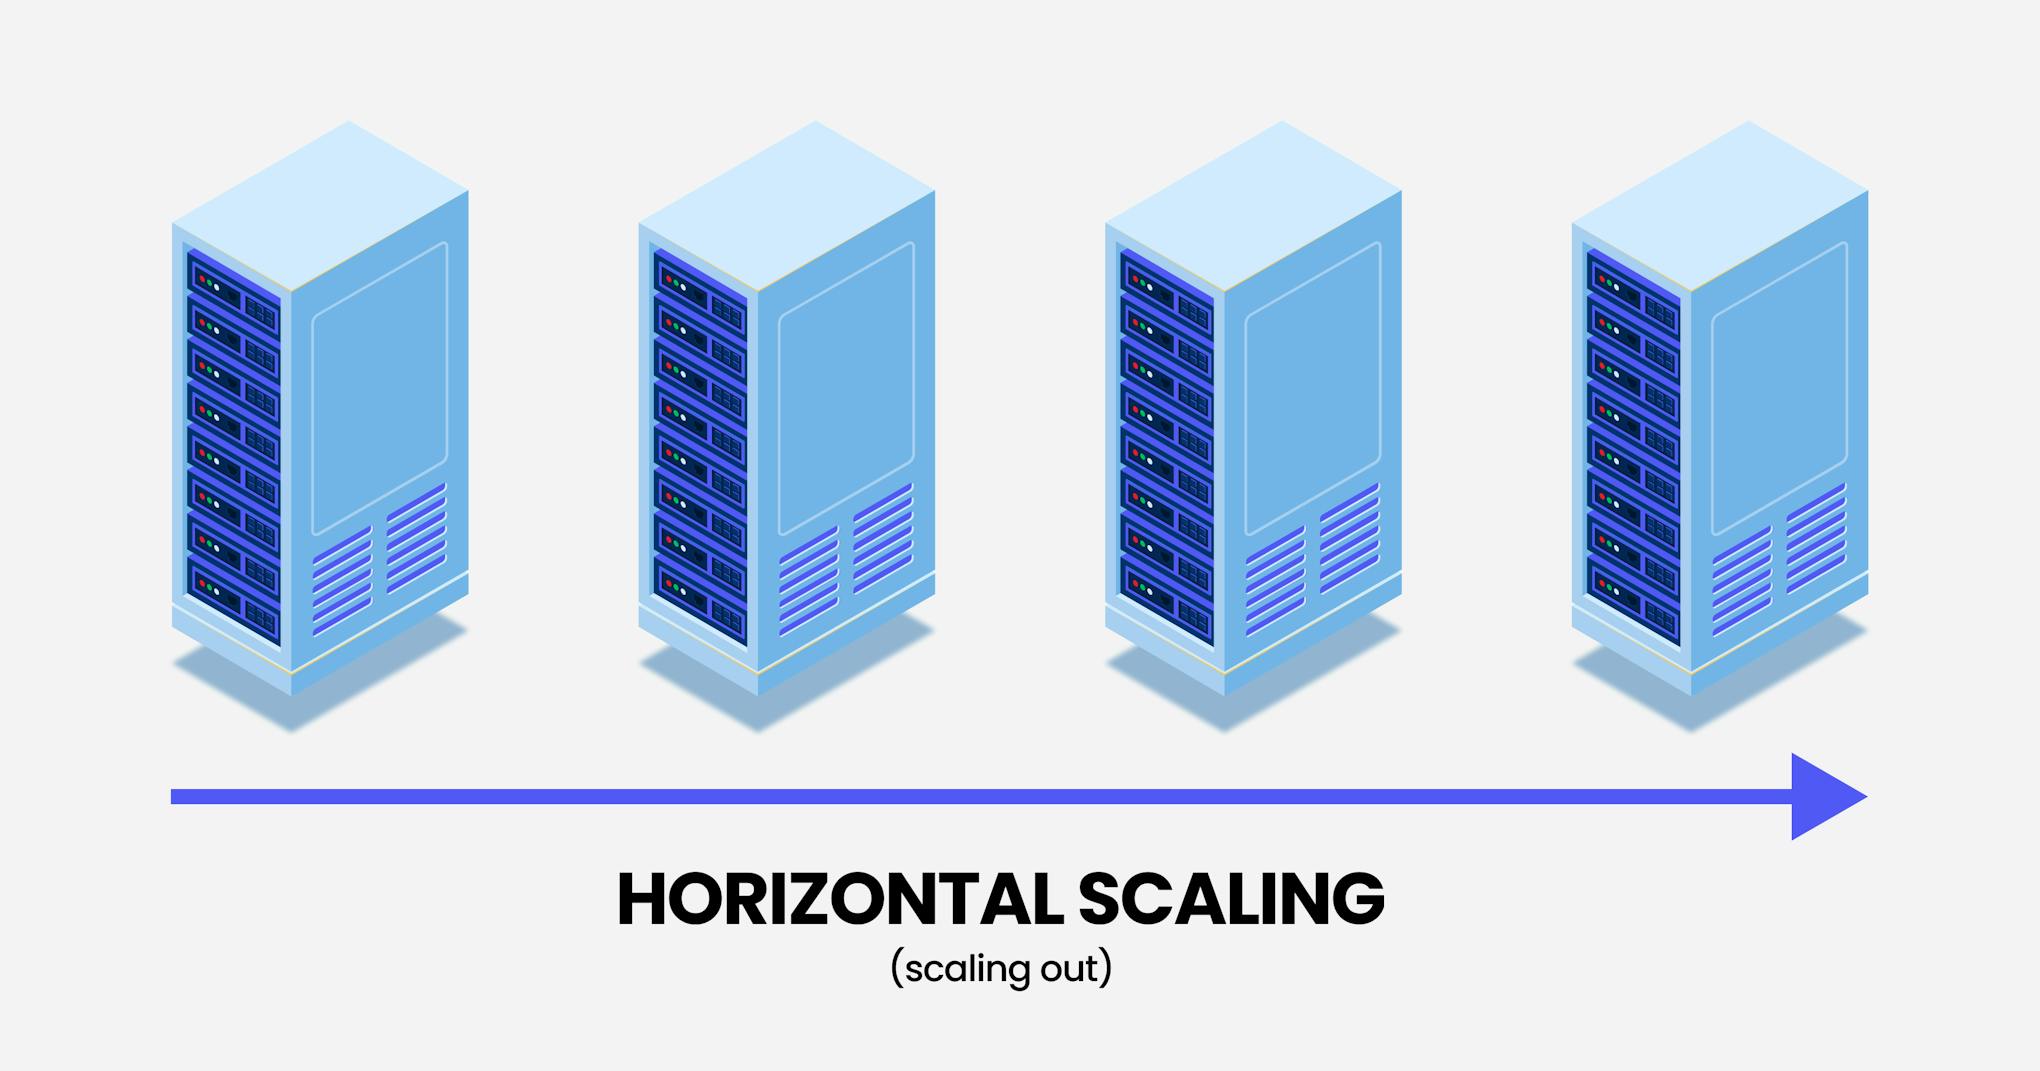 What is horizontal scaling?